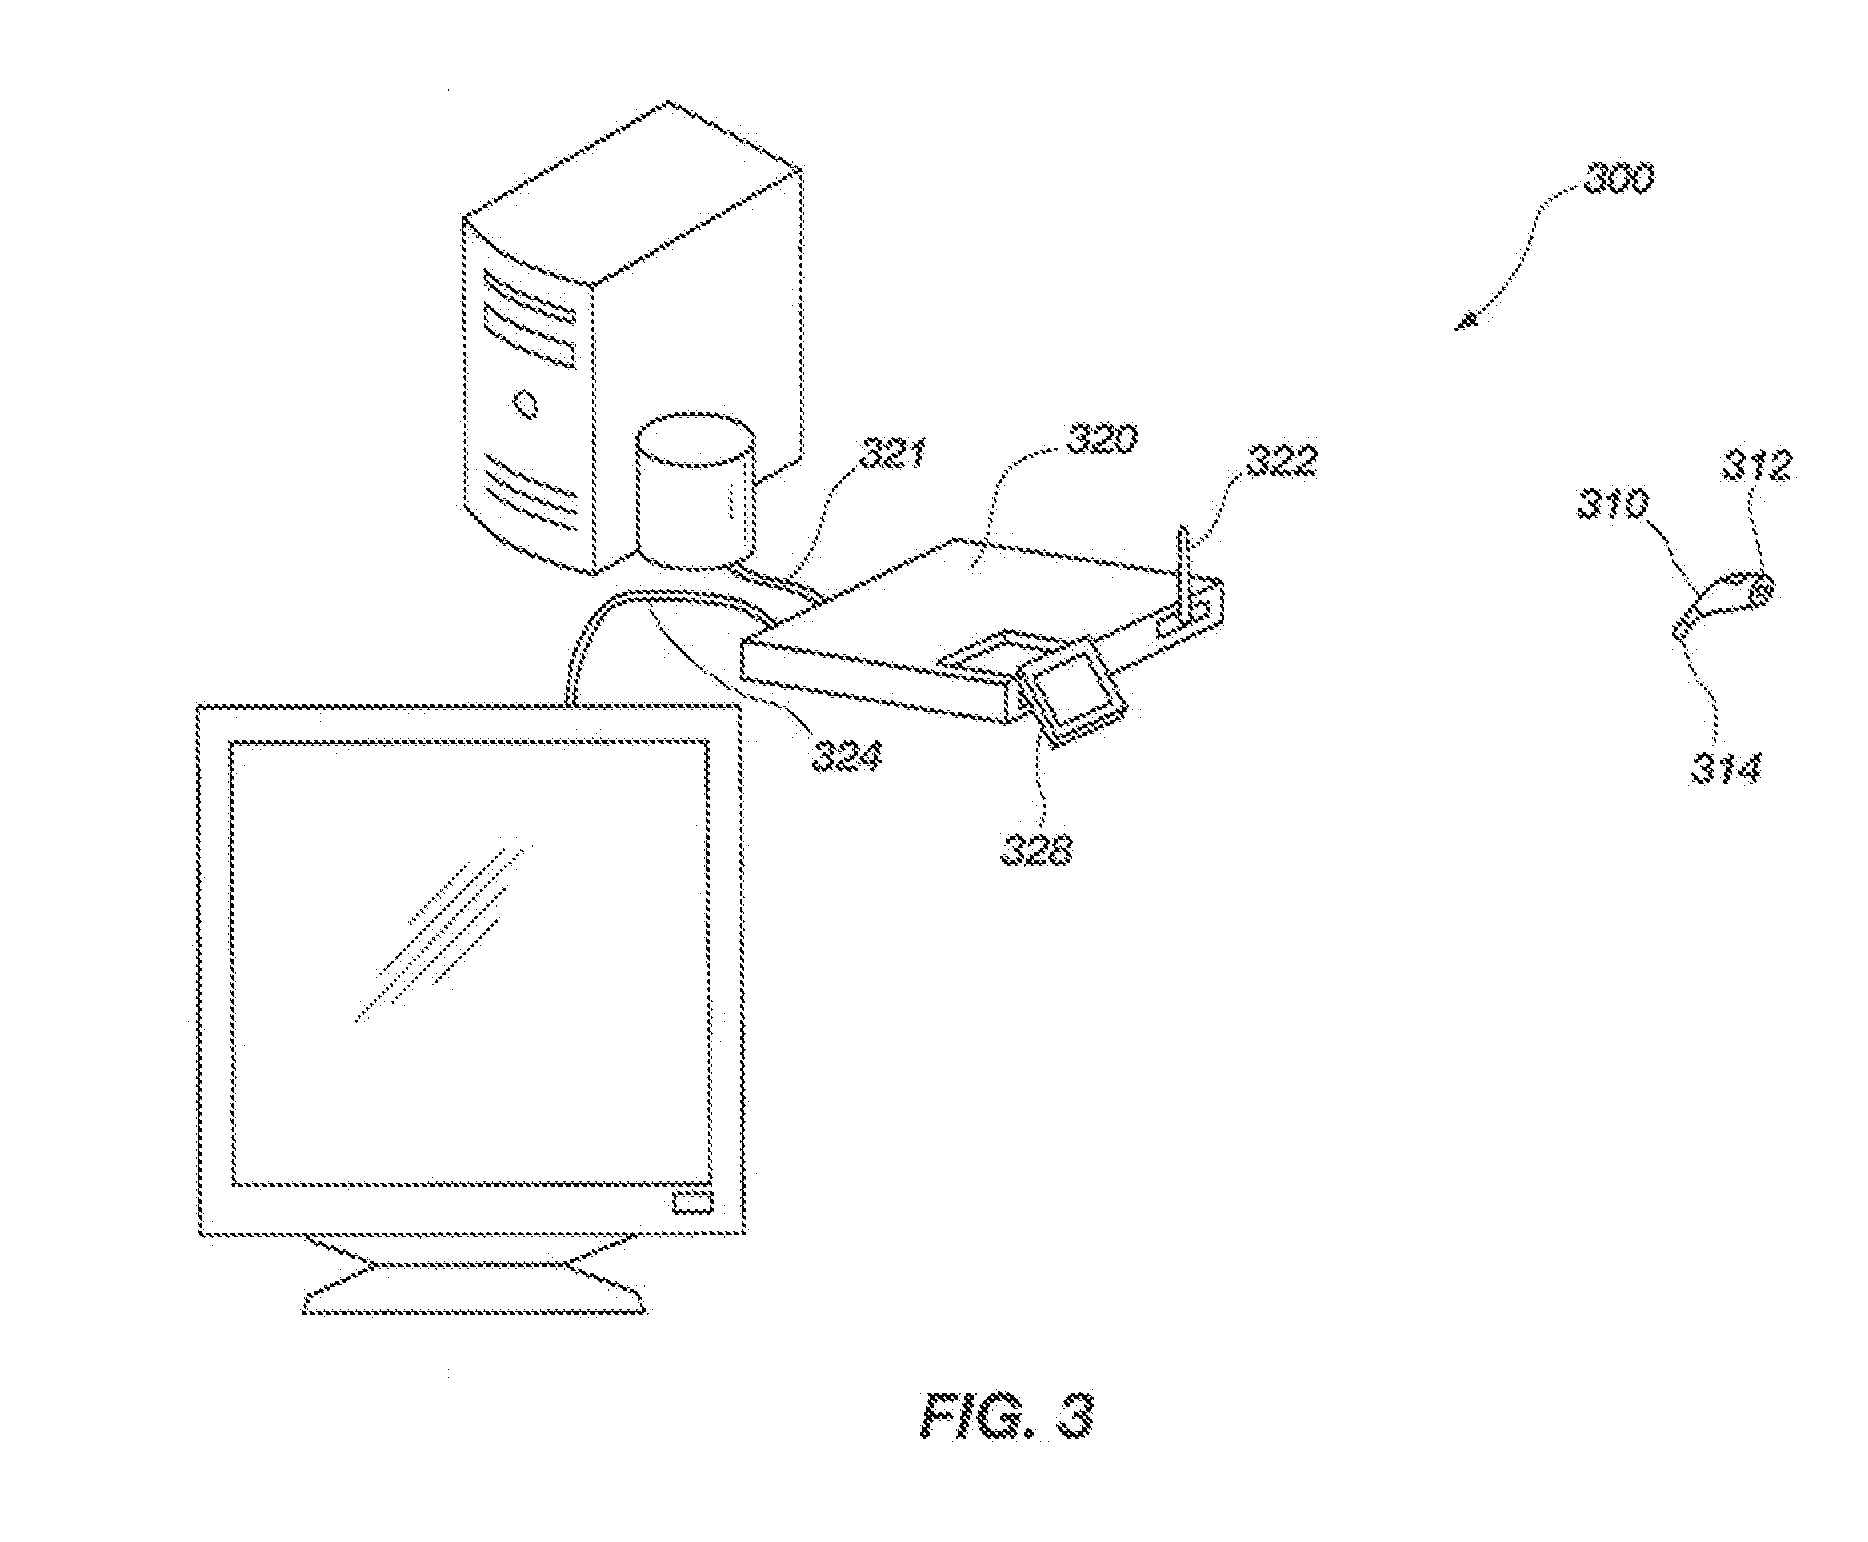 System and method for providing a single use imaging device for medical applications